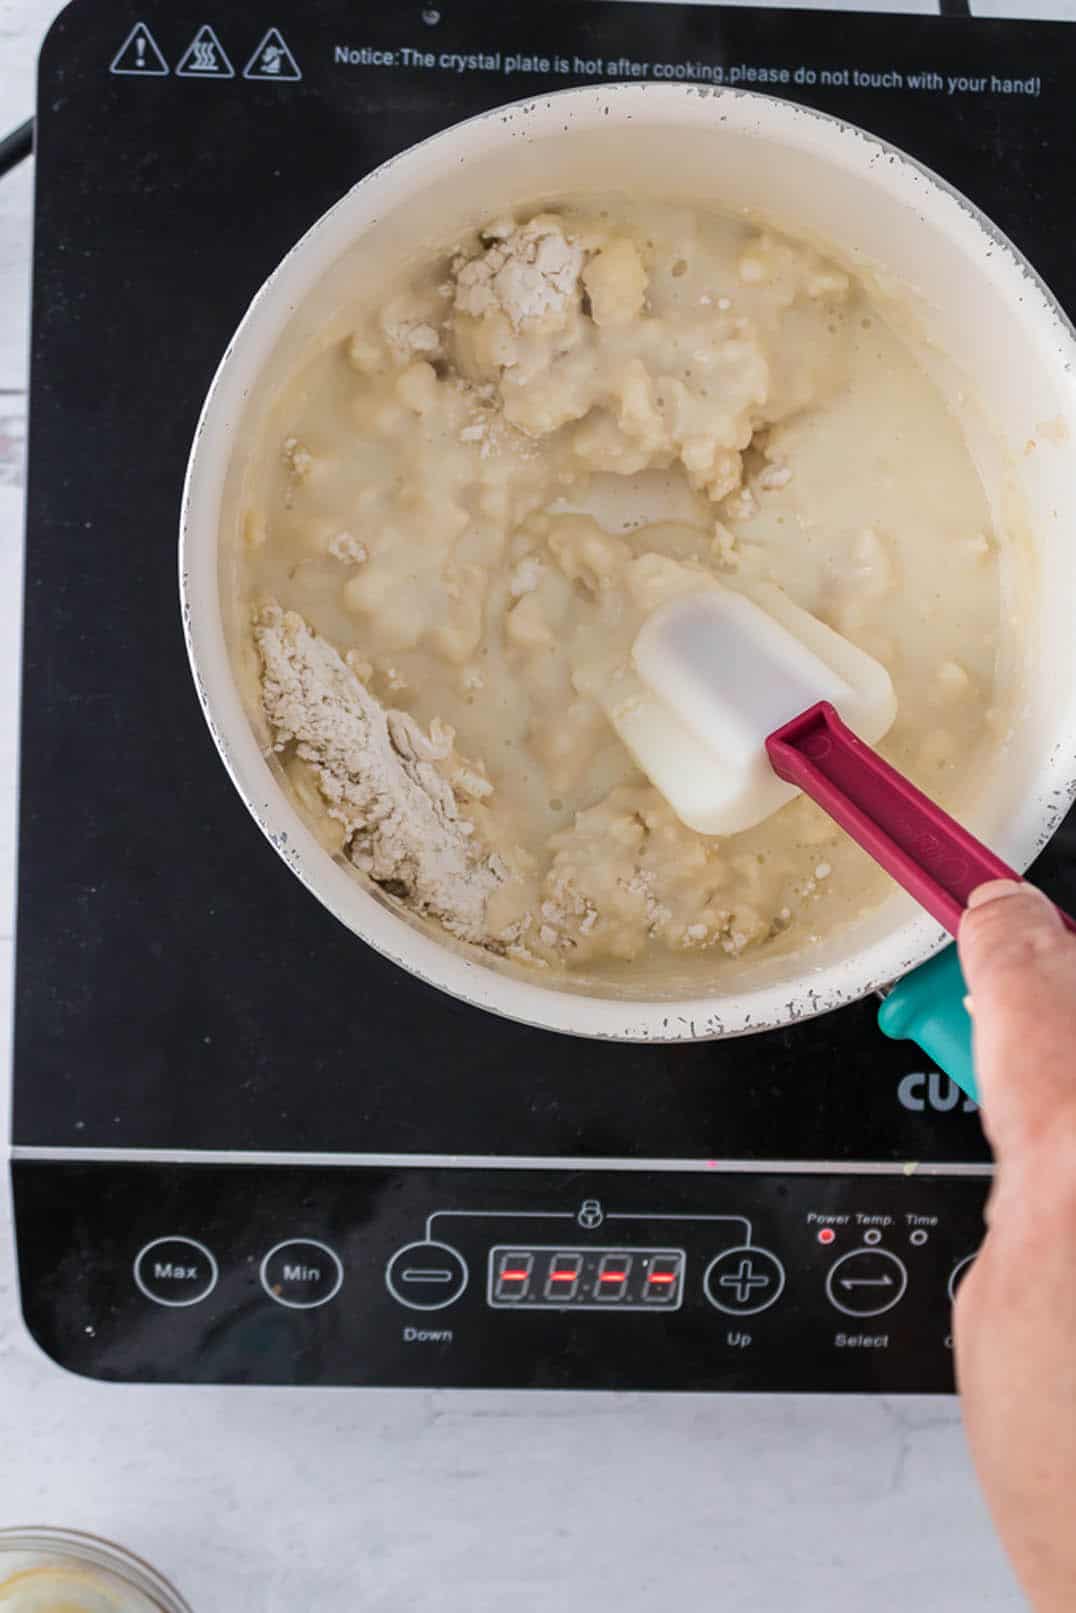 Cooking a dough batter to make a batch of churros